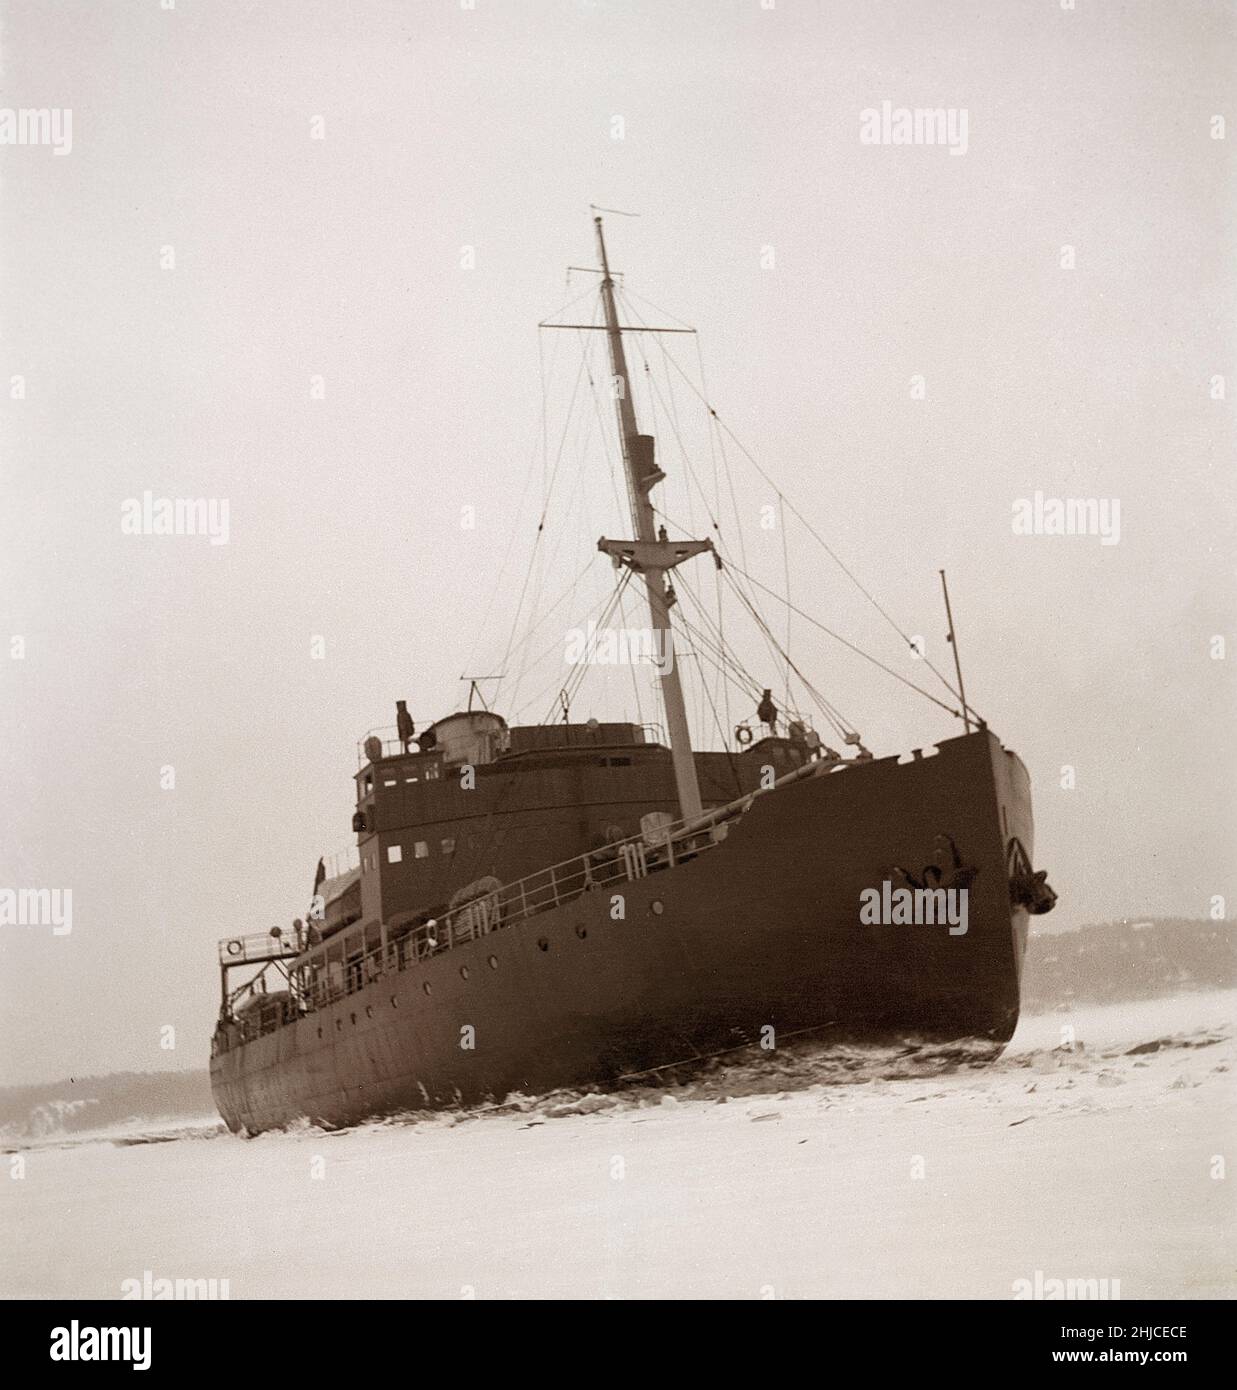 Winter at sea in the 1940s. Pictured the swedish icebreaker Ymer breaking the ice in the inner waters at the swedish coast in febrary 1941. The icebreaker Ymer was built in Malmö 1931-1933 and served as a state icebreaker for 44 years until she was sold and scrapped 1976. The winters during the World war II was often exceptionally cold and the ice became a big problem for the shipping industry and for the military.  Sweden 1942 Kristoffersson ref 172-6 Stock Photo